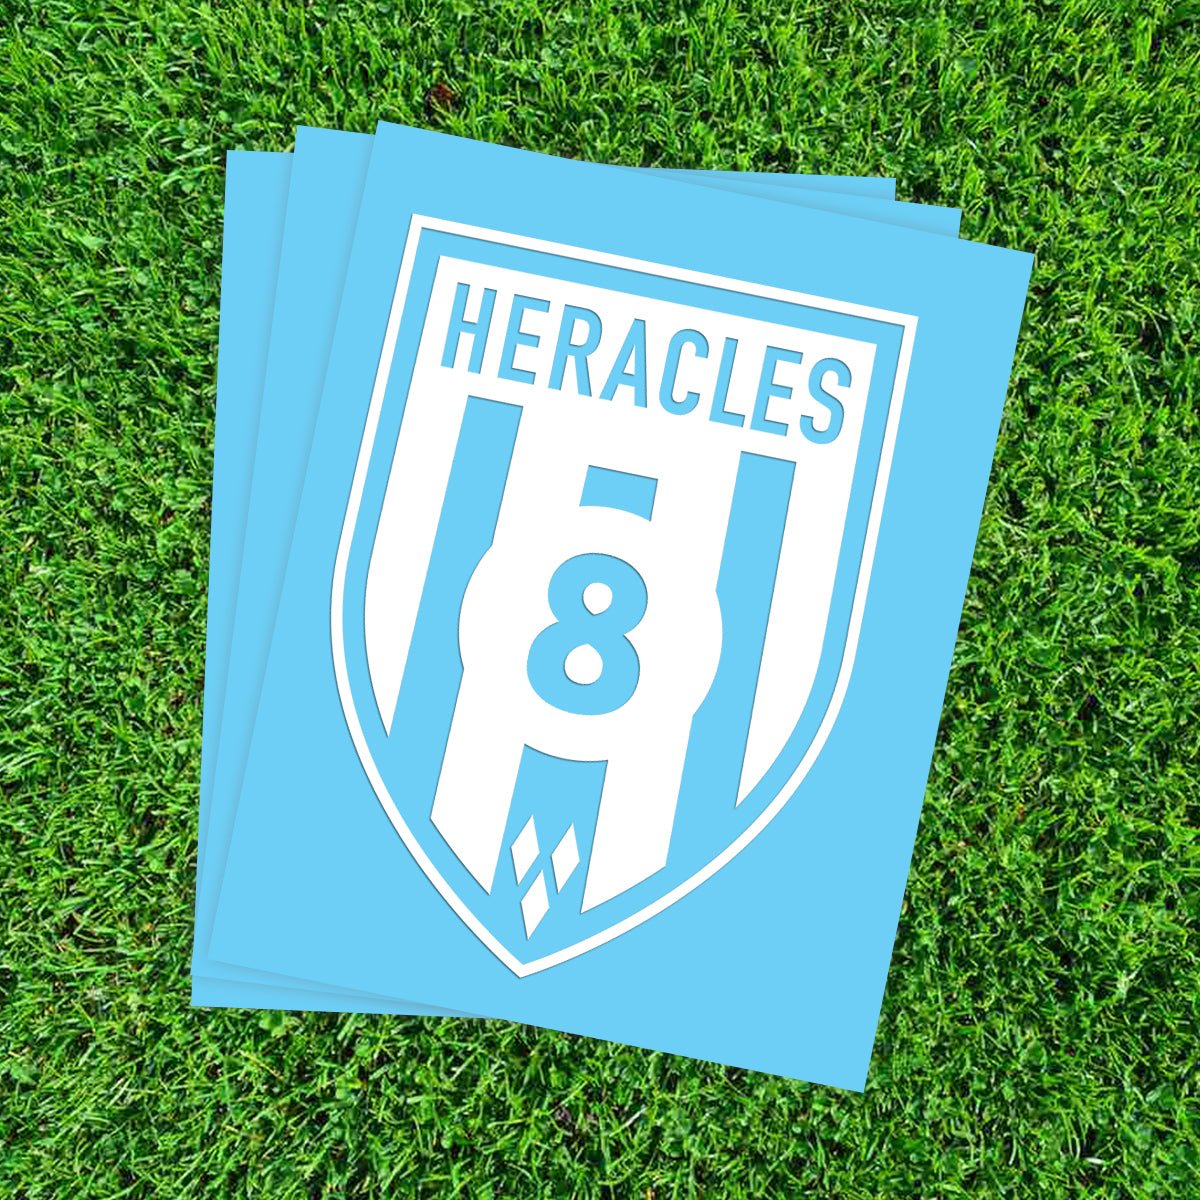 Heracles Almelo Container Stickers XL - 3 stuks - Kliko stickers - Koning Spandoek Heracles Almelo Container Stickers XL - 3 stuks - Kliko stickers